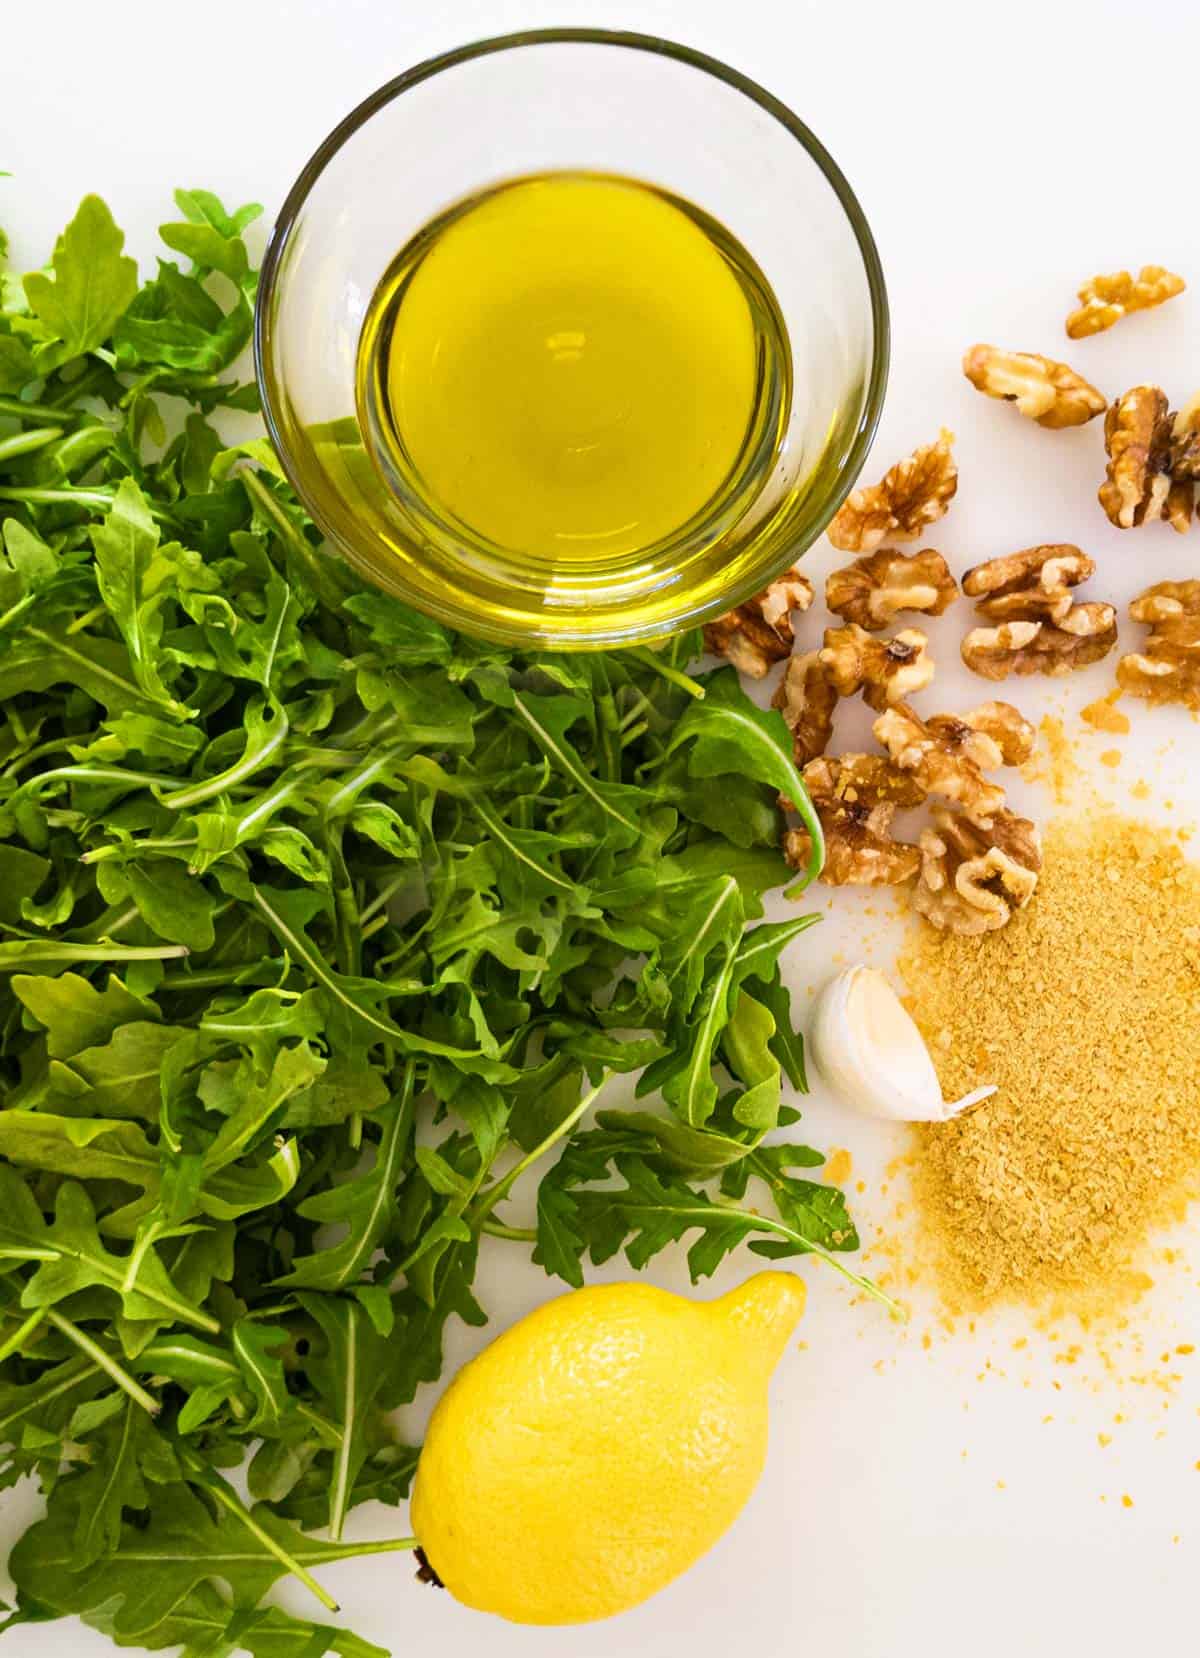 Arugula, olive oil, lemon, walnuts, and nutritional yeast laid out on a cutting board